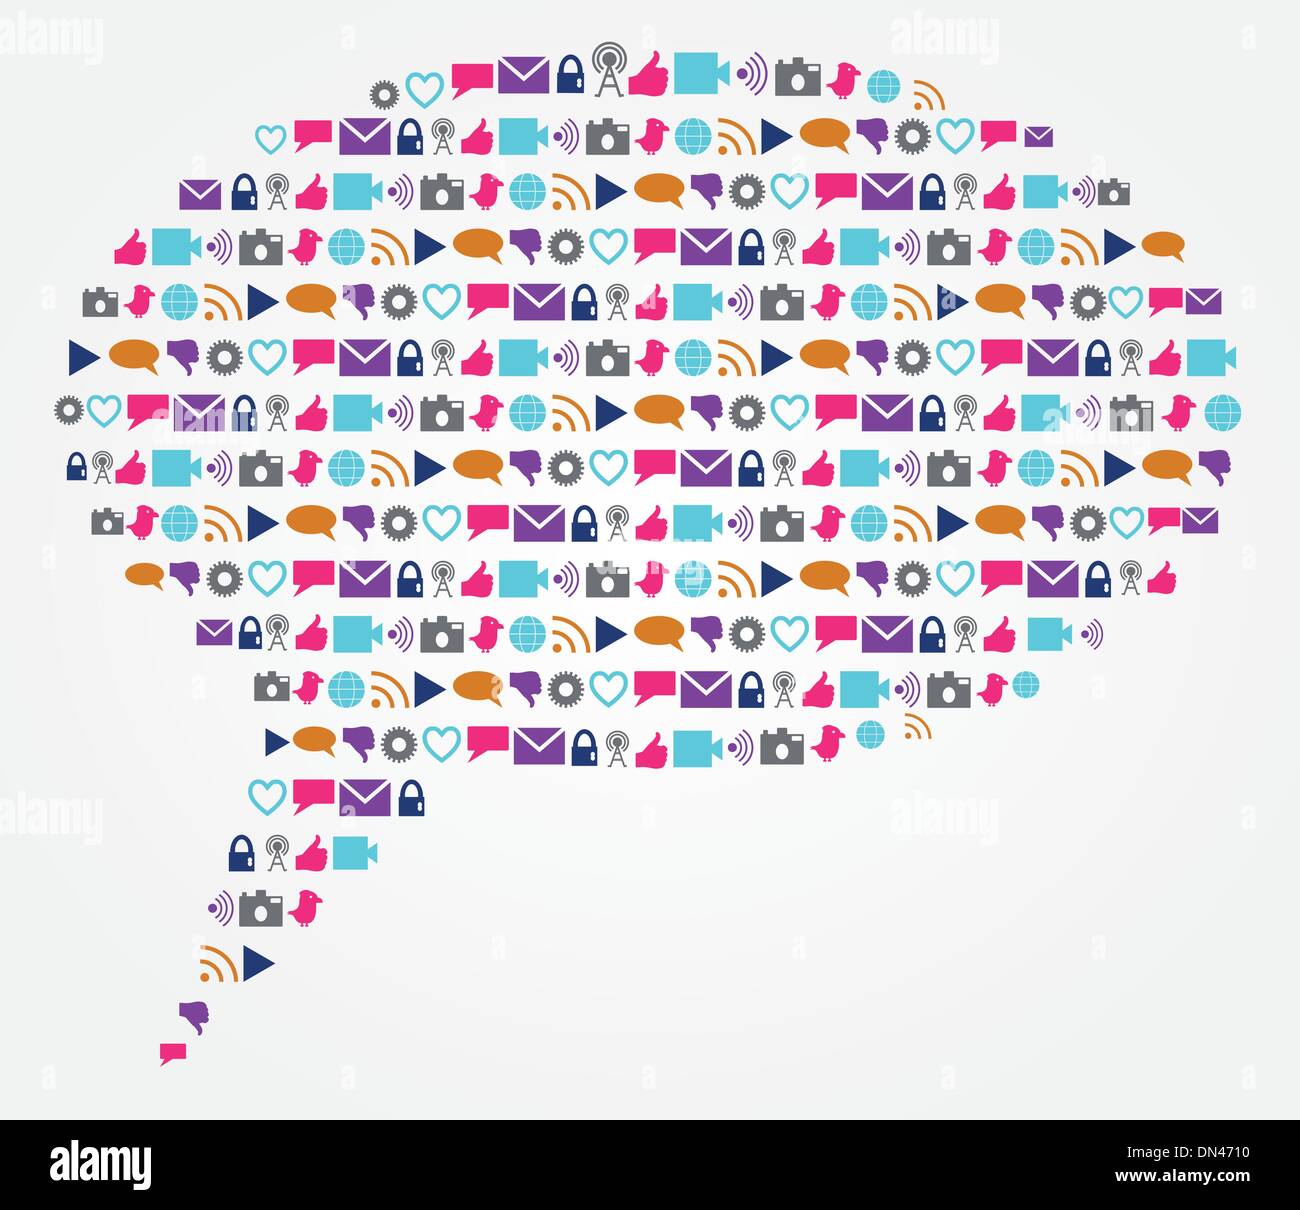 Social technology and networking speech and text bubble Stock Vector